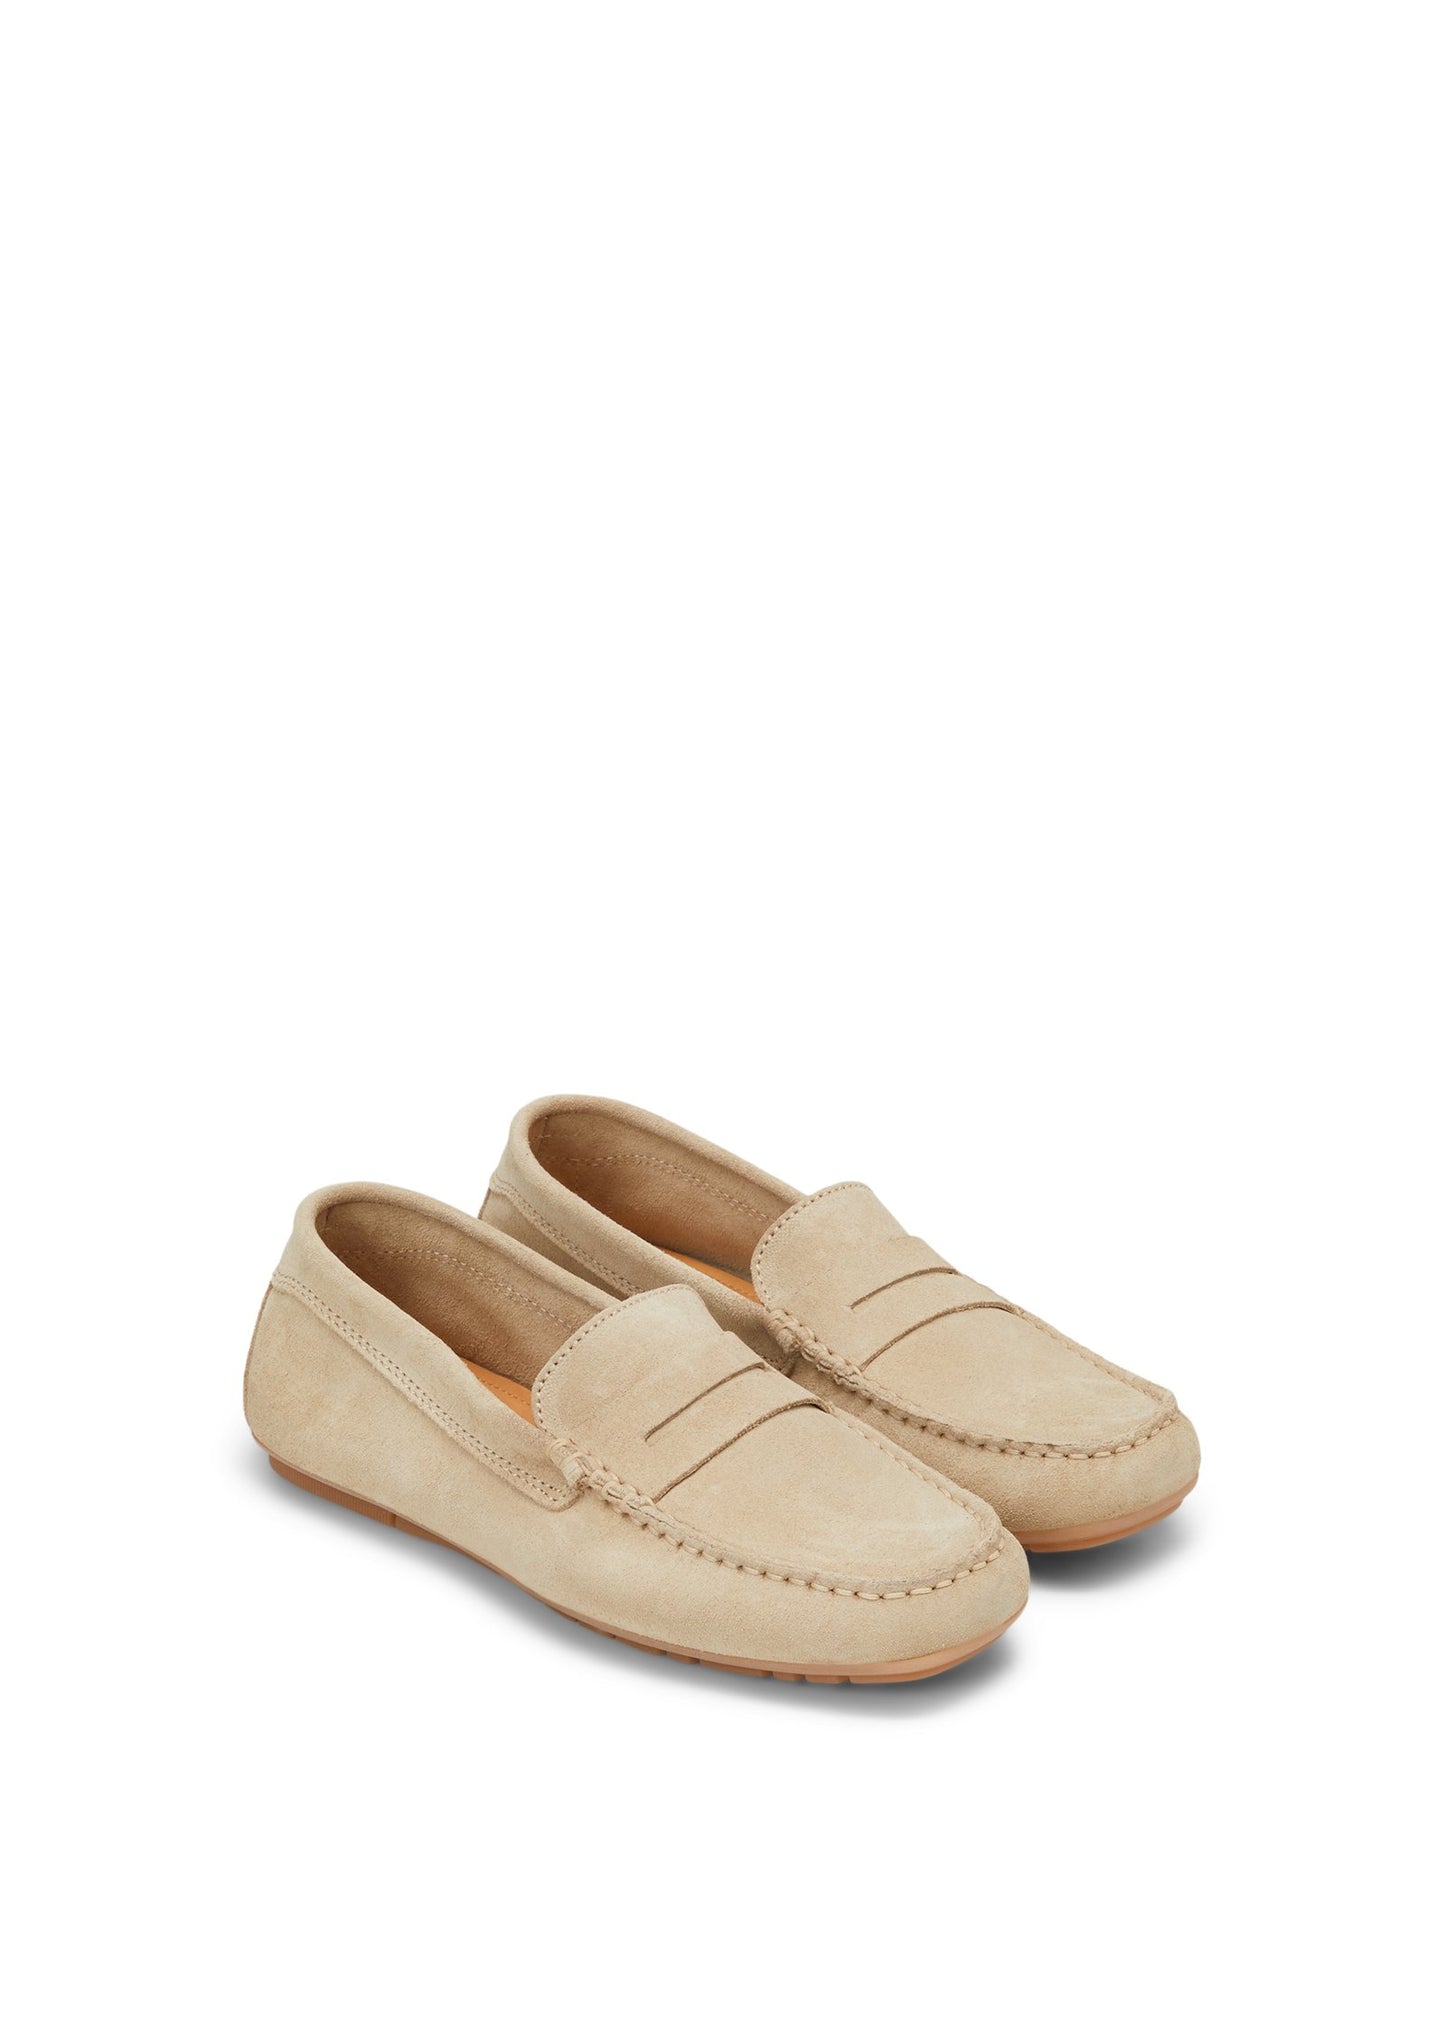 Moccasin (Sand)